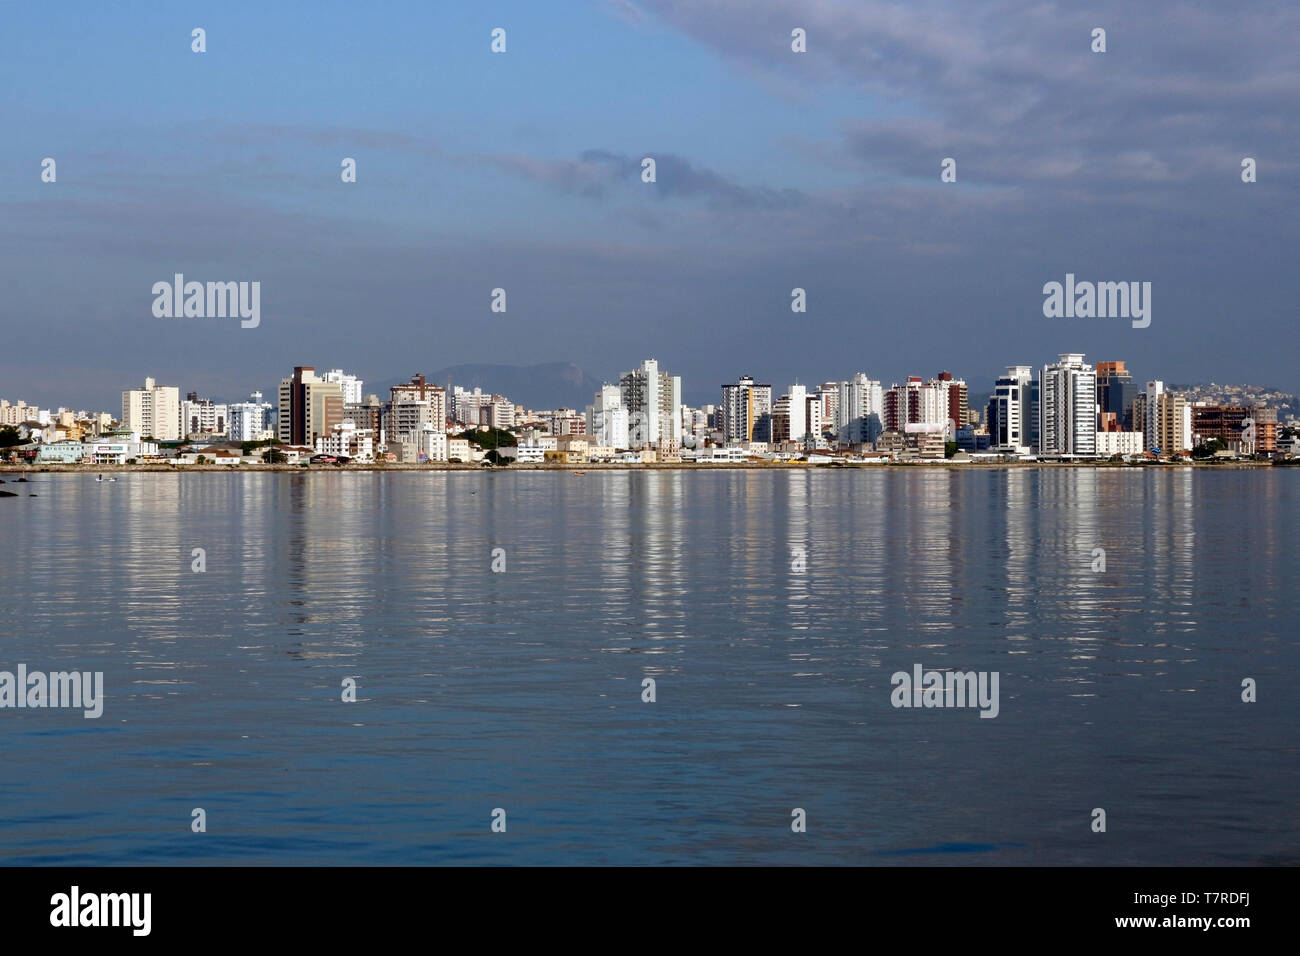 Skyline of the city of Florianópolis. Region of the promenade along the coast of the capital, in the state of Santa Catarina, Brazil. Stock Photo